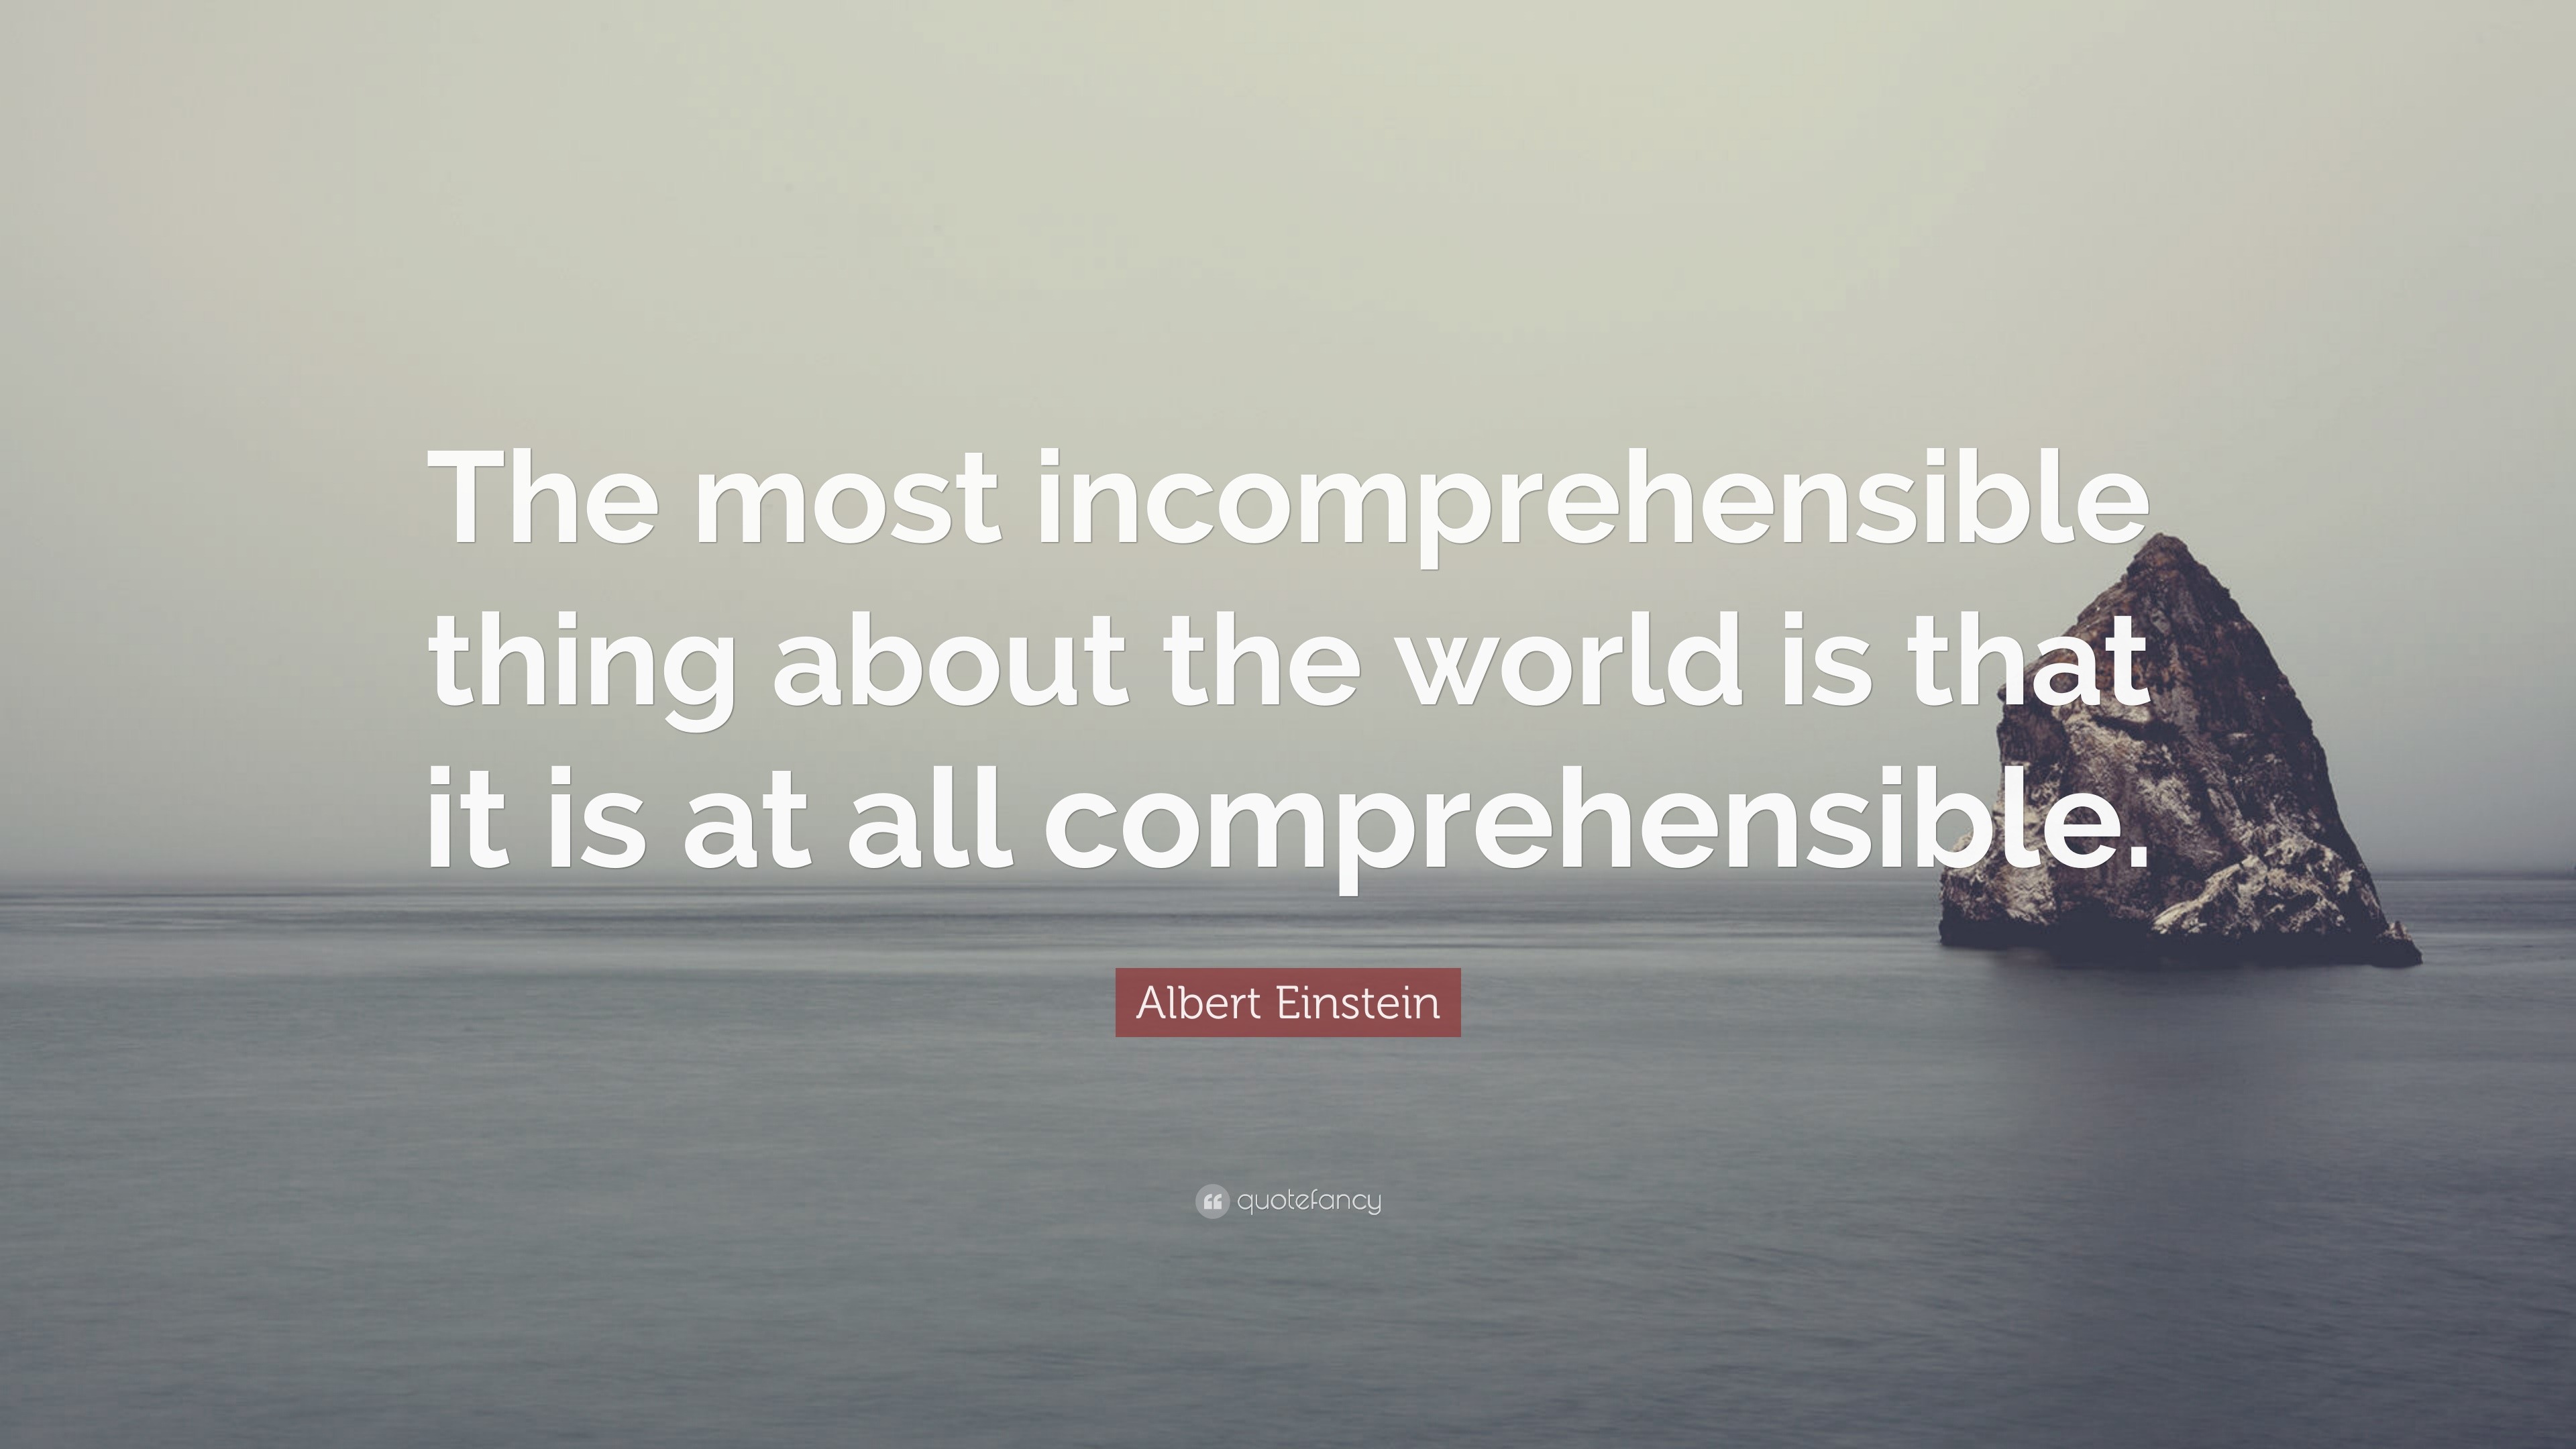 Albert Einstein Quote: “The most incomprehensible thing about the world ...